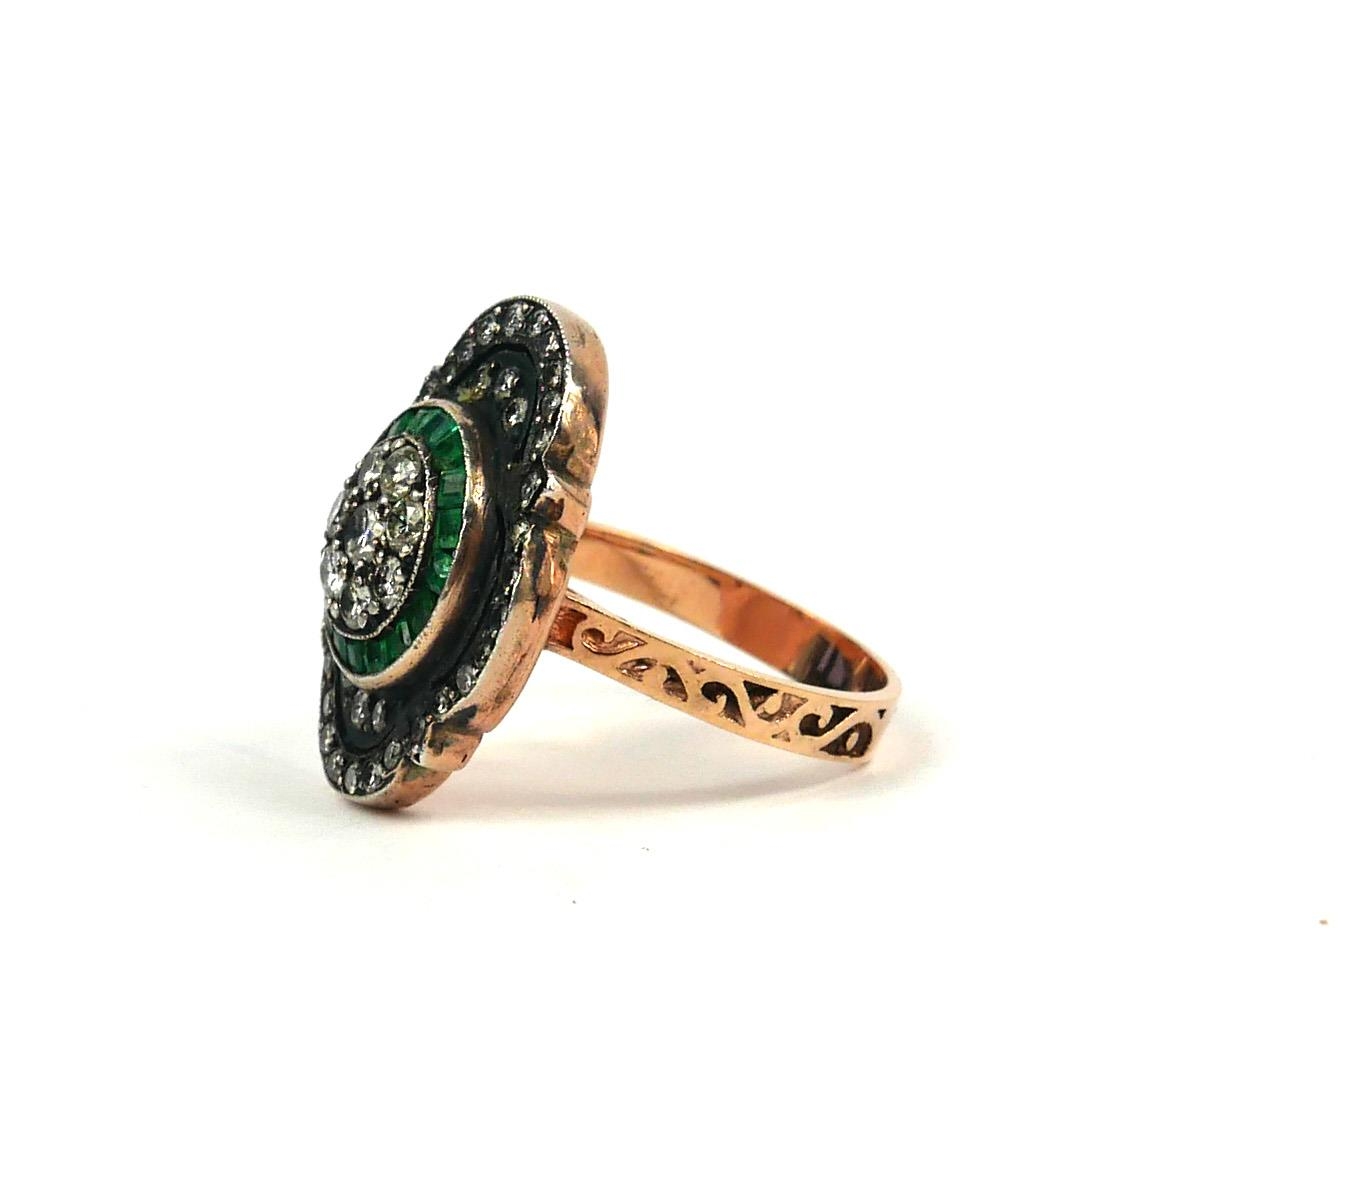 A VINTAGE STYLE 8CT ROSE GOLD (SILVER TOP) RING set with round diamonds and emeralds. - Image 2 of 2